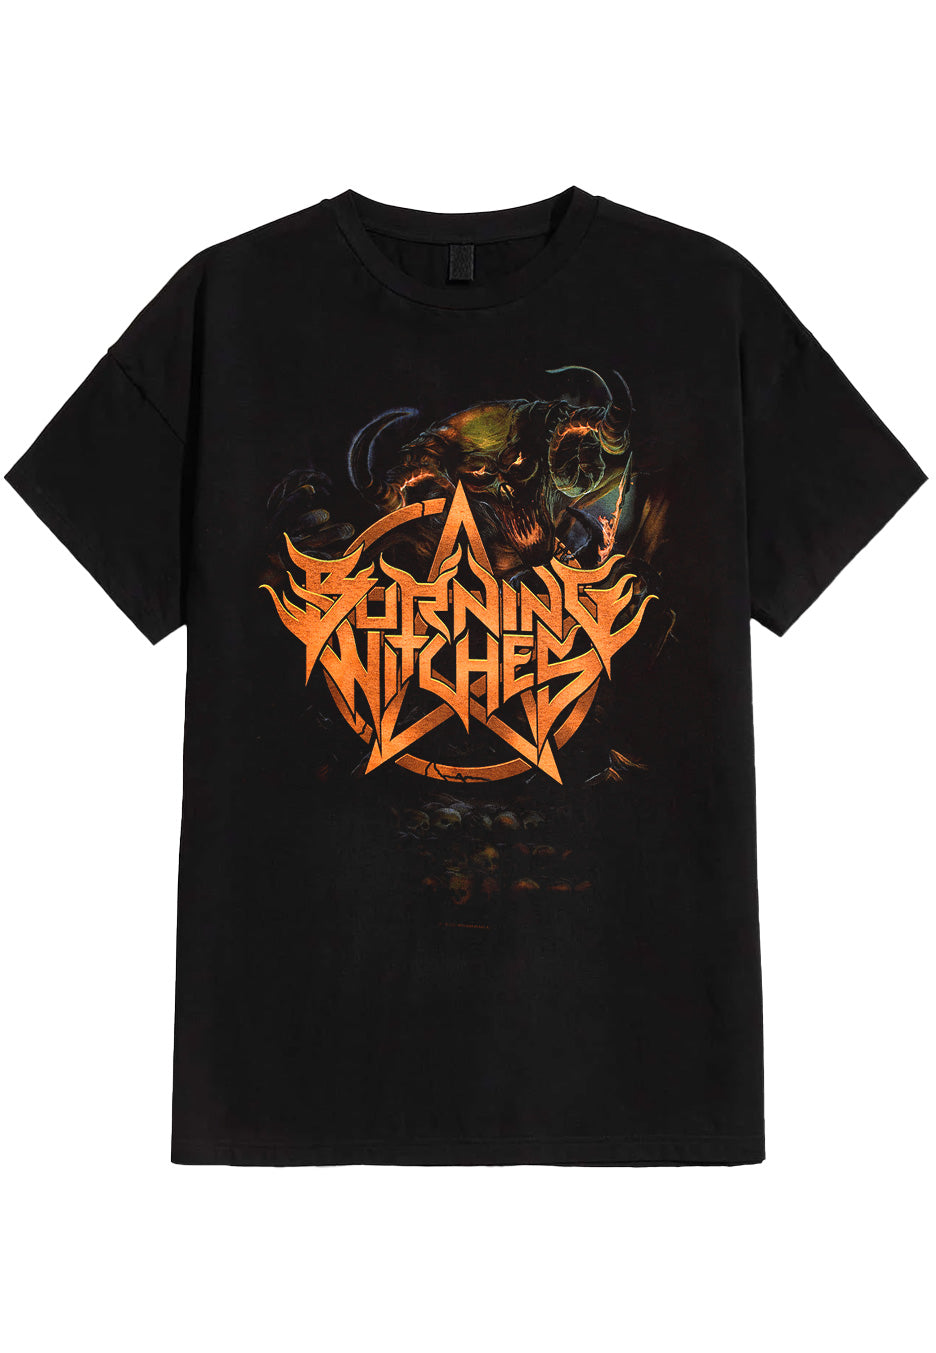 Burning Witches - Dance With The Devil - T-Shirt